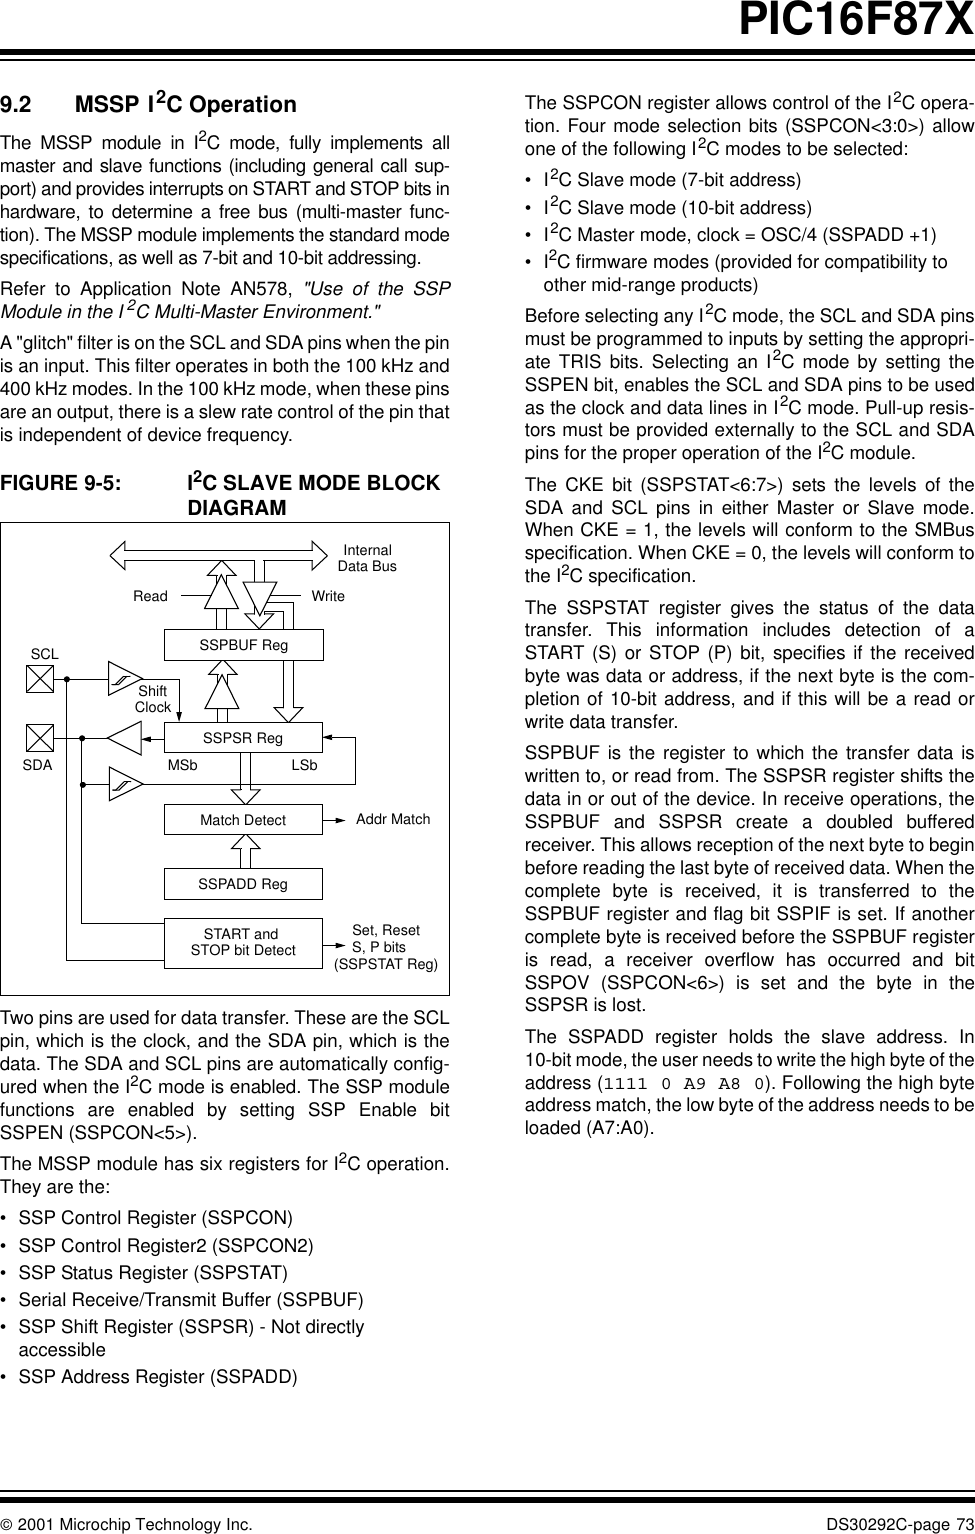  2001 Microchip Technology Inc. DS30292C-page 73PIC16F87X9.2 MSSP I2C OperationThe MSSP module in I2C mode, fully implements allmaster and slave functions (including general call sup-port) and provides interrupts on START and STOP bits inhardware, to determine a free bus (multi-master func-tion). The MSSP module implements the standard modespecifications, as well as 7-bit and 10-bit addressing.Refer to Application Note AN578, &quot;Use of the SSPModule in the I 2C Multi-Master Environment.&quot;A &quot;glitch&quot; filter is on the SCL and SDA pins when the pinis an input. This filter operates in both the 100 kHz and400 kHz modes. In the 100 kHz mode, when these pinsare an output, there is a slew rate control of the pin thatis independent of device frequency.FIGURE 9-5: I2C SLAVE MODE BLOCK DIAGRAM   Two pins are used for data transfer. These are the SCLpin, which is the clock, and the SDA pin, which is thedata. The SDA and SCL pins are automatically config-ured when the I2C mode is enabled. The SSP modulefunctions are enabled by setting SSP Enable bitSSPEN (SSPCON&lt;5&gt;).The MSSP module has six registers for I2C operation.They are the: •SSP Control Register (SSPCON)•SSP Control Register2 (SSPCON2)•SSP Status Register (SSPSTAT)•Serial Receive/Transmit Buffer (SSPBUF)•SSP Shift Register (SSPSR) - Not directly accessible•SSP Address Register (SSPADD)The SSPCON register allows control of the I2C opera-tion. Four mode selection bits (SSPCON&lt;3:0&gt;) allowone of the following I2C modes to be selected:•I2C Slave mode (7-bit address)•I2C Slave mode (10-bit address)•I2C Master mode, clock = OSC/4 (SSPADD +1)•I2C firmware modes (provided for compatibility to other mid-range products)Before selecting any I2C mode, the SCL and SDA pinsmust be programmed to inputs by setting the appropri-ate TRIS bits. Selecting an I2C mode by setting theSSPEN bit, enables the SCL and SDA pins to be usedas the clock and data lines in I2C mode. Pull-up resis-tors must be provided externally to the SCL and SDApins for the proper operation of the I2C module.The CKE bit (SSPSTAT&lt;6:7&gt;) sets the levels of theSDA and SCL pins in either Master or Slave mode.When CKE = 1, the levels will conform to the SMBusspecification. When CKE = 0, the levels will conform tothe I2C specification.The SSPSTAT register gives the status of the datatransfer. This information includes detection of aSTART (S) or STOP (P) bit, specifies if the receivedbyte was data or address, if the next byte is the com-pletion of 10-bit address, and if this will be a read orwrite data transfer. SSPBUF is the register to which the transfer data iswritten to, or read from. The SSPSR register shifts thedata in or out of the device. In receive operations, theSSPBUF and SSPSR create a doubled bufferedreceiver. This allows reception of the next byte to beginbefore reading the last byte of received data. When thecomplete byte is received, it is transferred to theSSPBUF register and flag bit SSPIF is set. If anothercomplete byte is received before the SSPBUF registeris read, a receiver overflow has occurred and bitSSPOV (SSPCON&lt;6&gt;) is set and the byte in theSSPSR is lost.The SSPADD register holds the slave address. In10-bit mode, the user needs to write the high byte of theaddress (1111 0 A9 A8 0). Following the high byteaddress match, the low byte of the address needs to beloaded (A7:A0).Read WriteSSPSR RegMatch DetectSSPADD RegSTART and STOP bit DetectSSPBUF RegInternalData BusAddr MatchSet, ResetS, P bits(SSPSTAT Reg)SCLShiftClockMSb LSbSDA